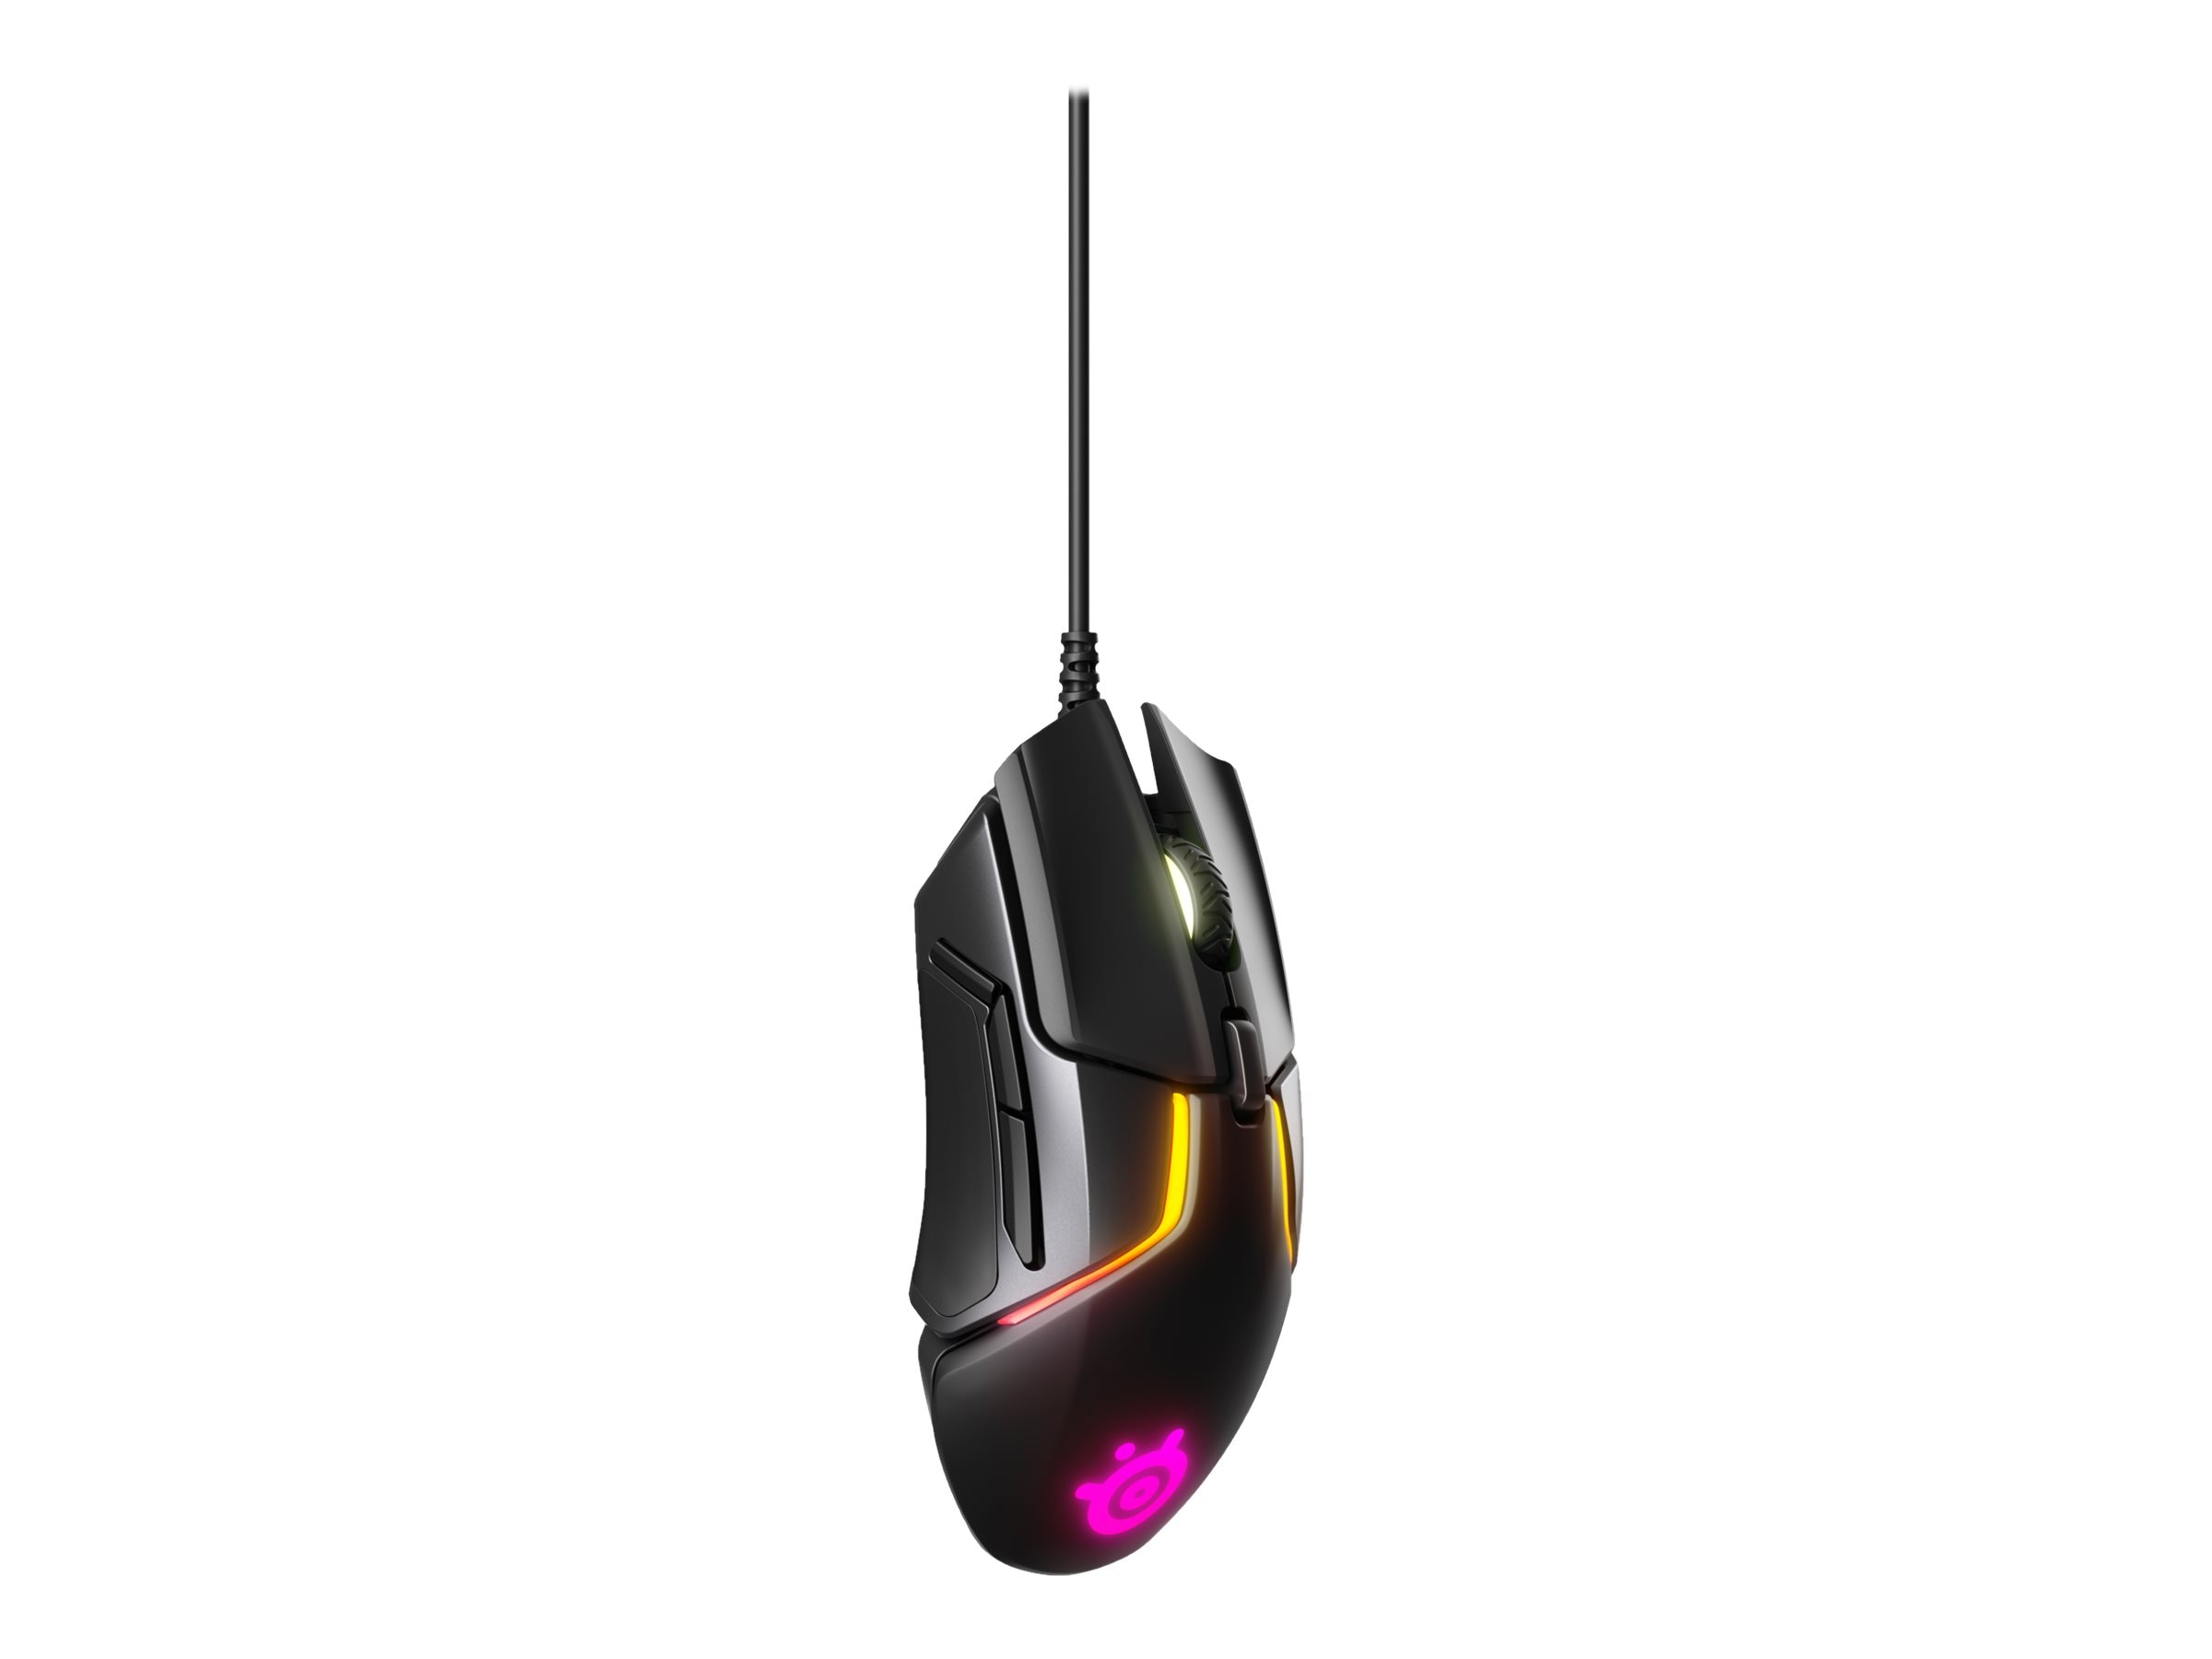 Buy Steelseries 600 Gaming at Connection Public Sector